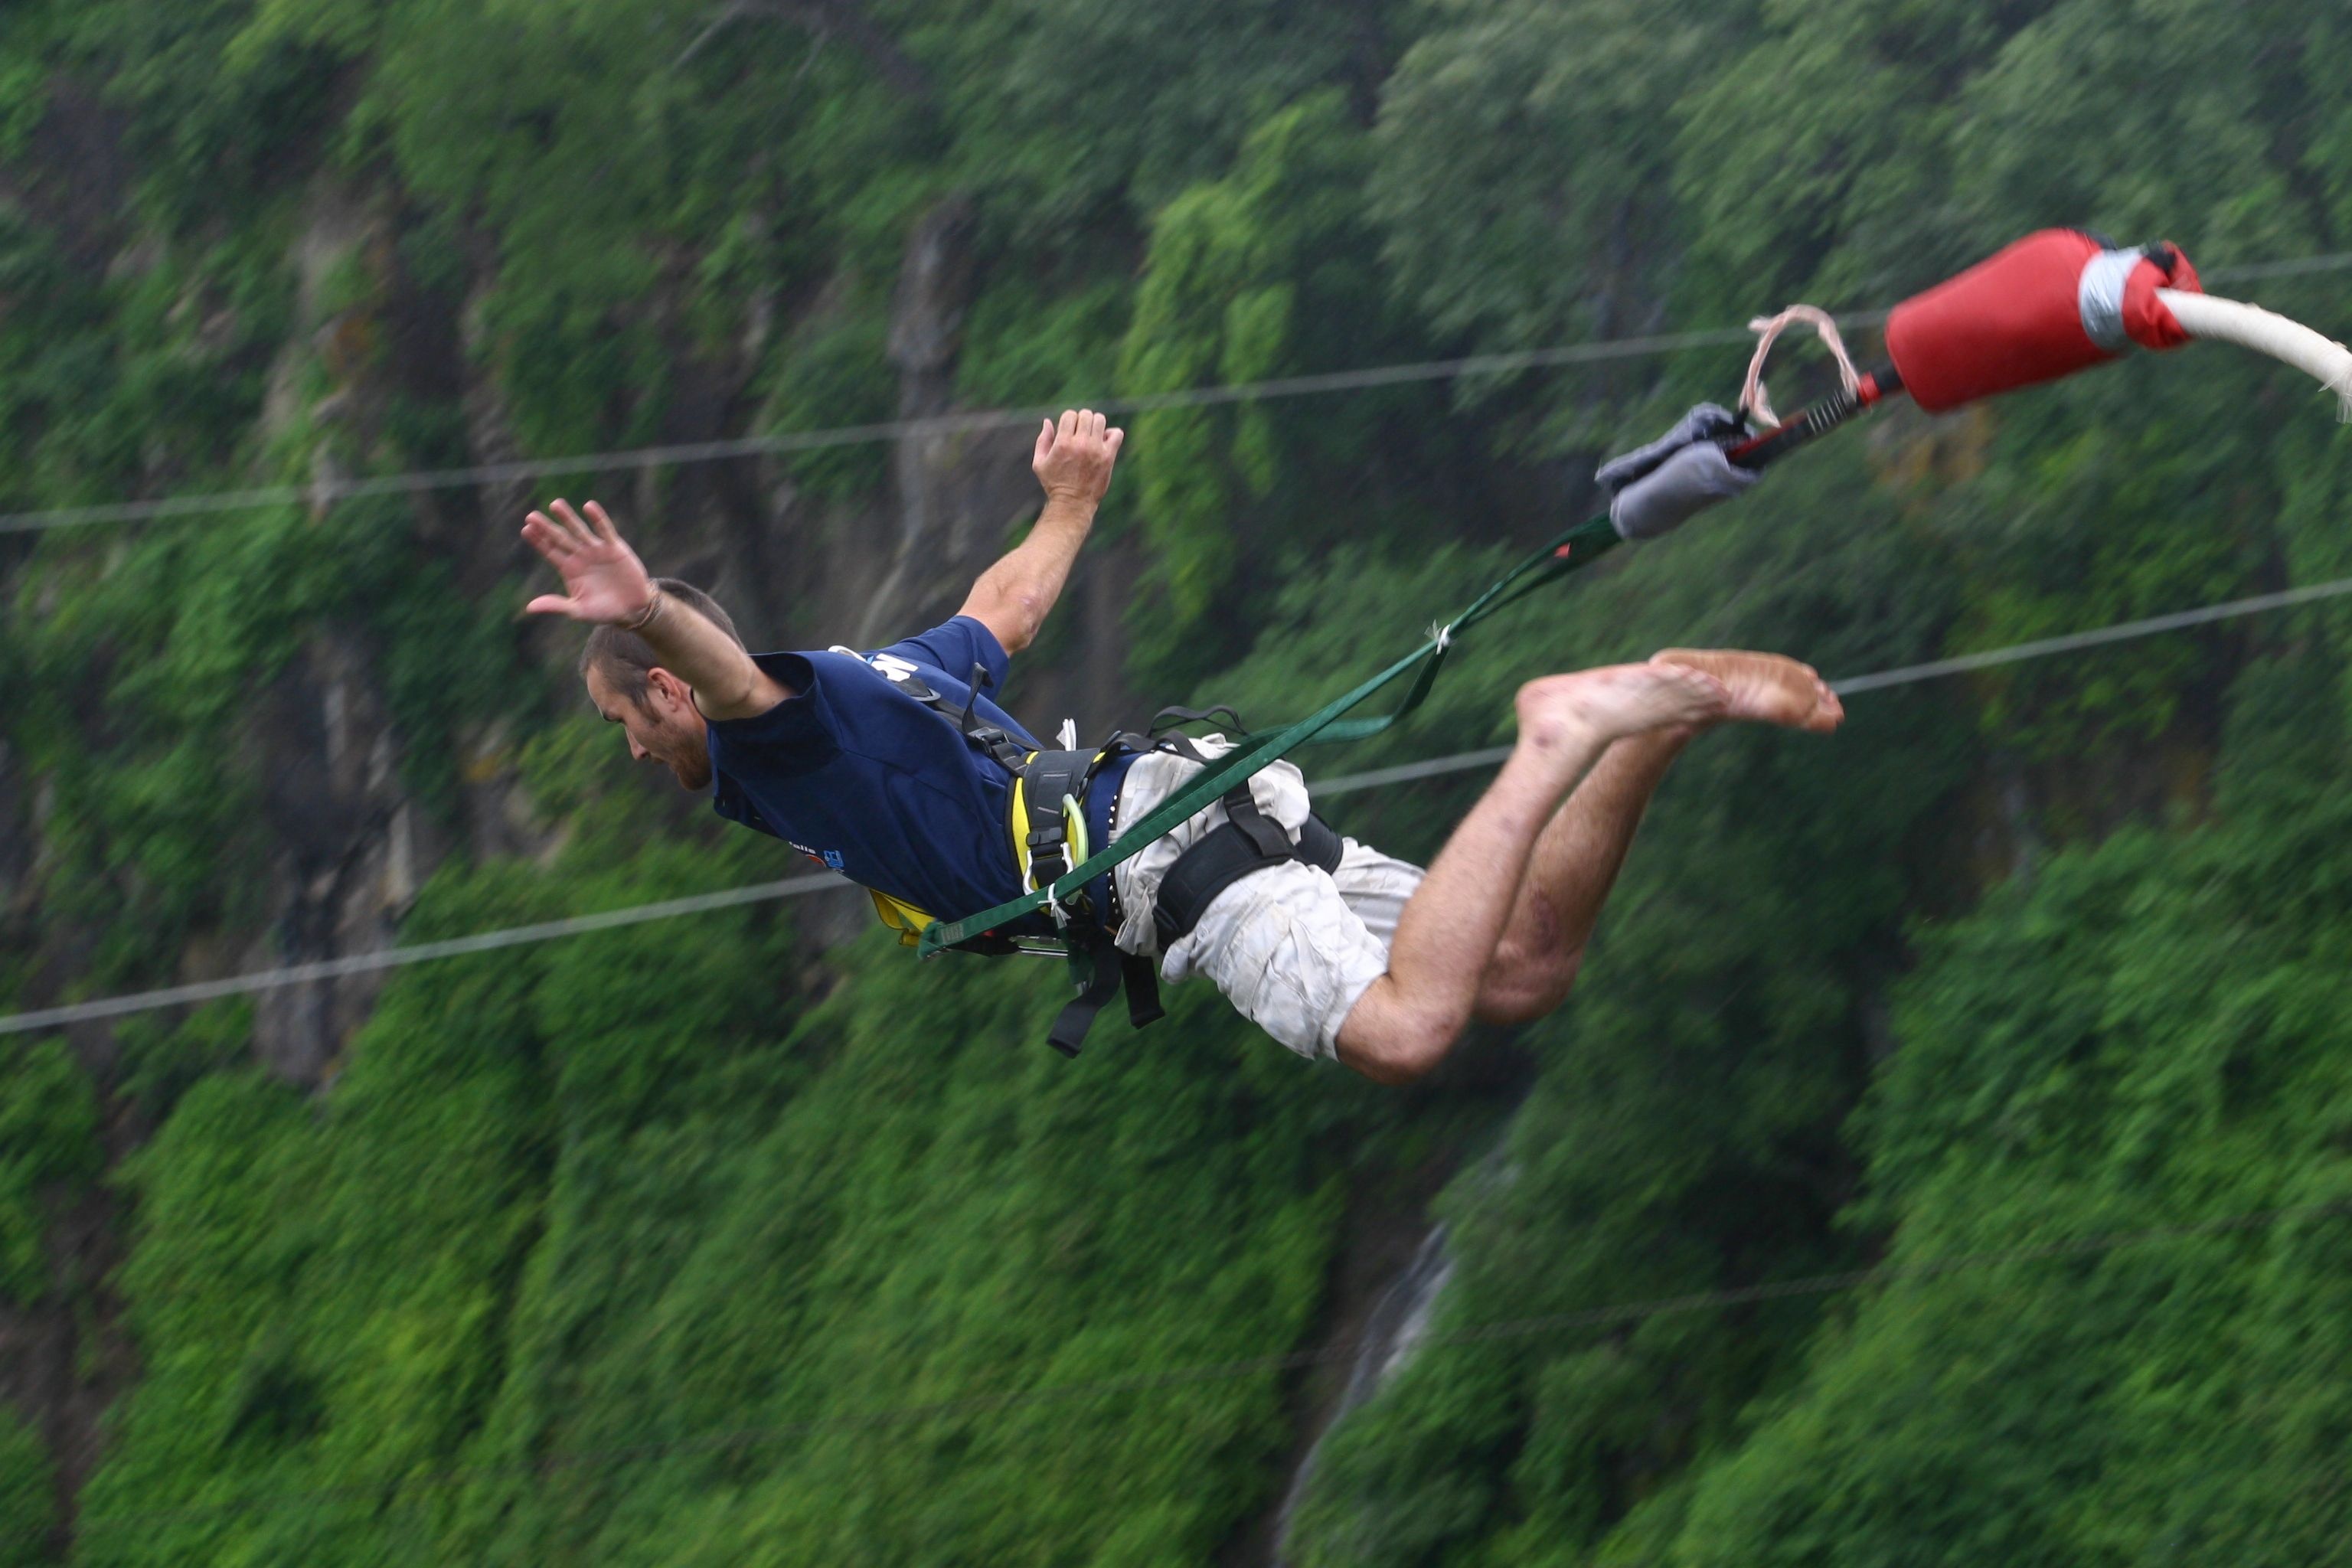 Bungee Jumping: Free-falling, Extreme adventurous activity, Thrilling recreation. 3080x2050 HD Wallpaper.